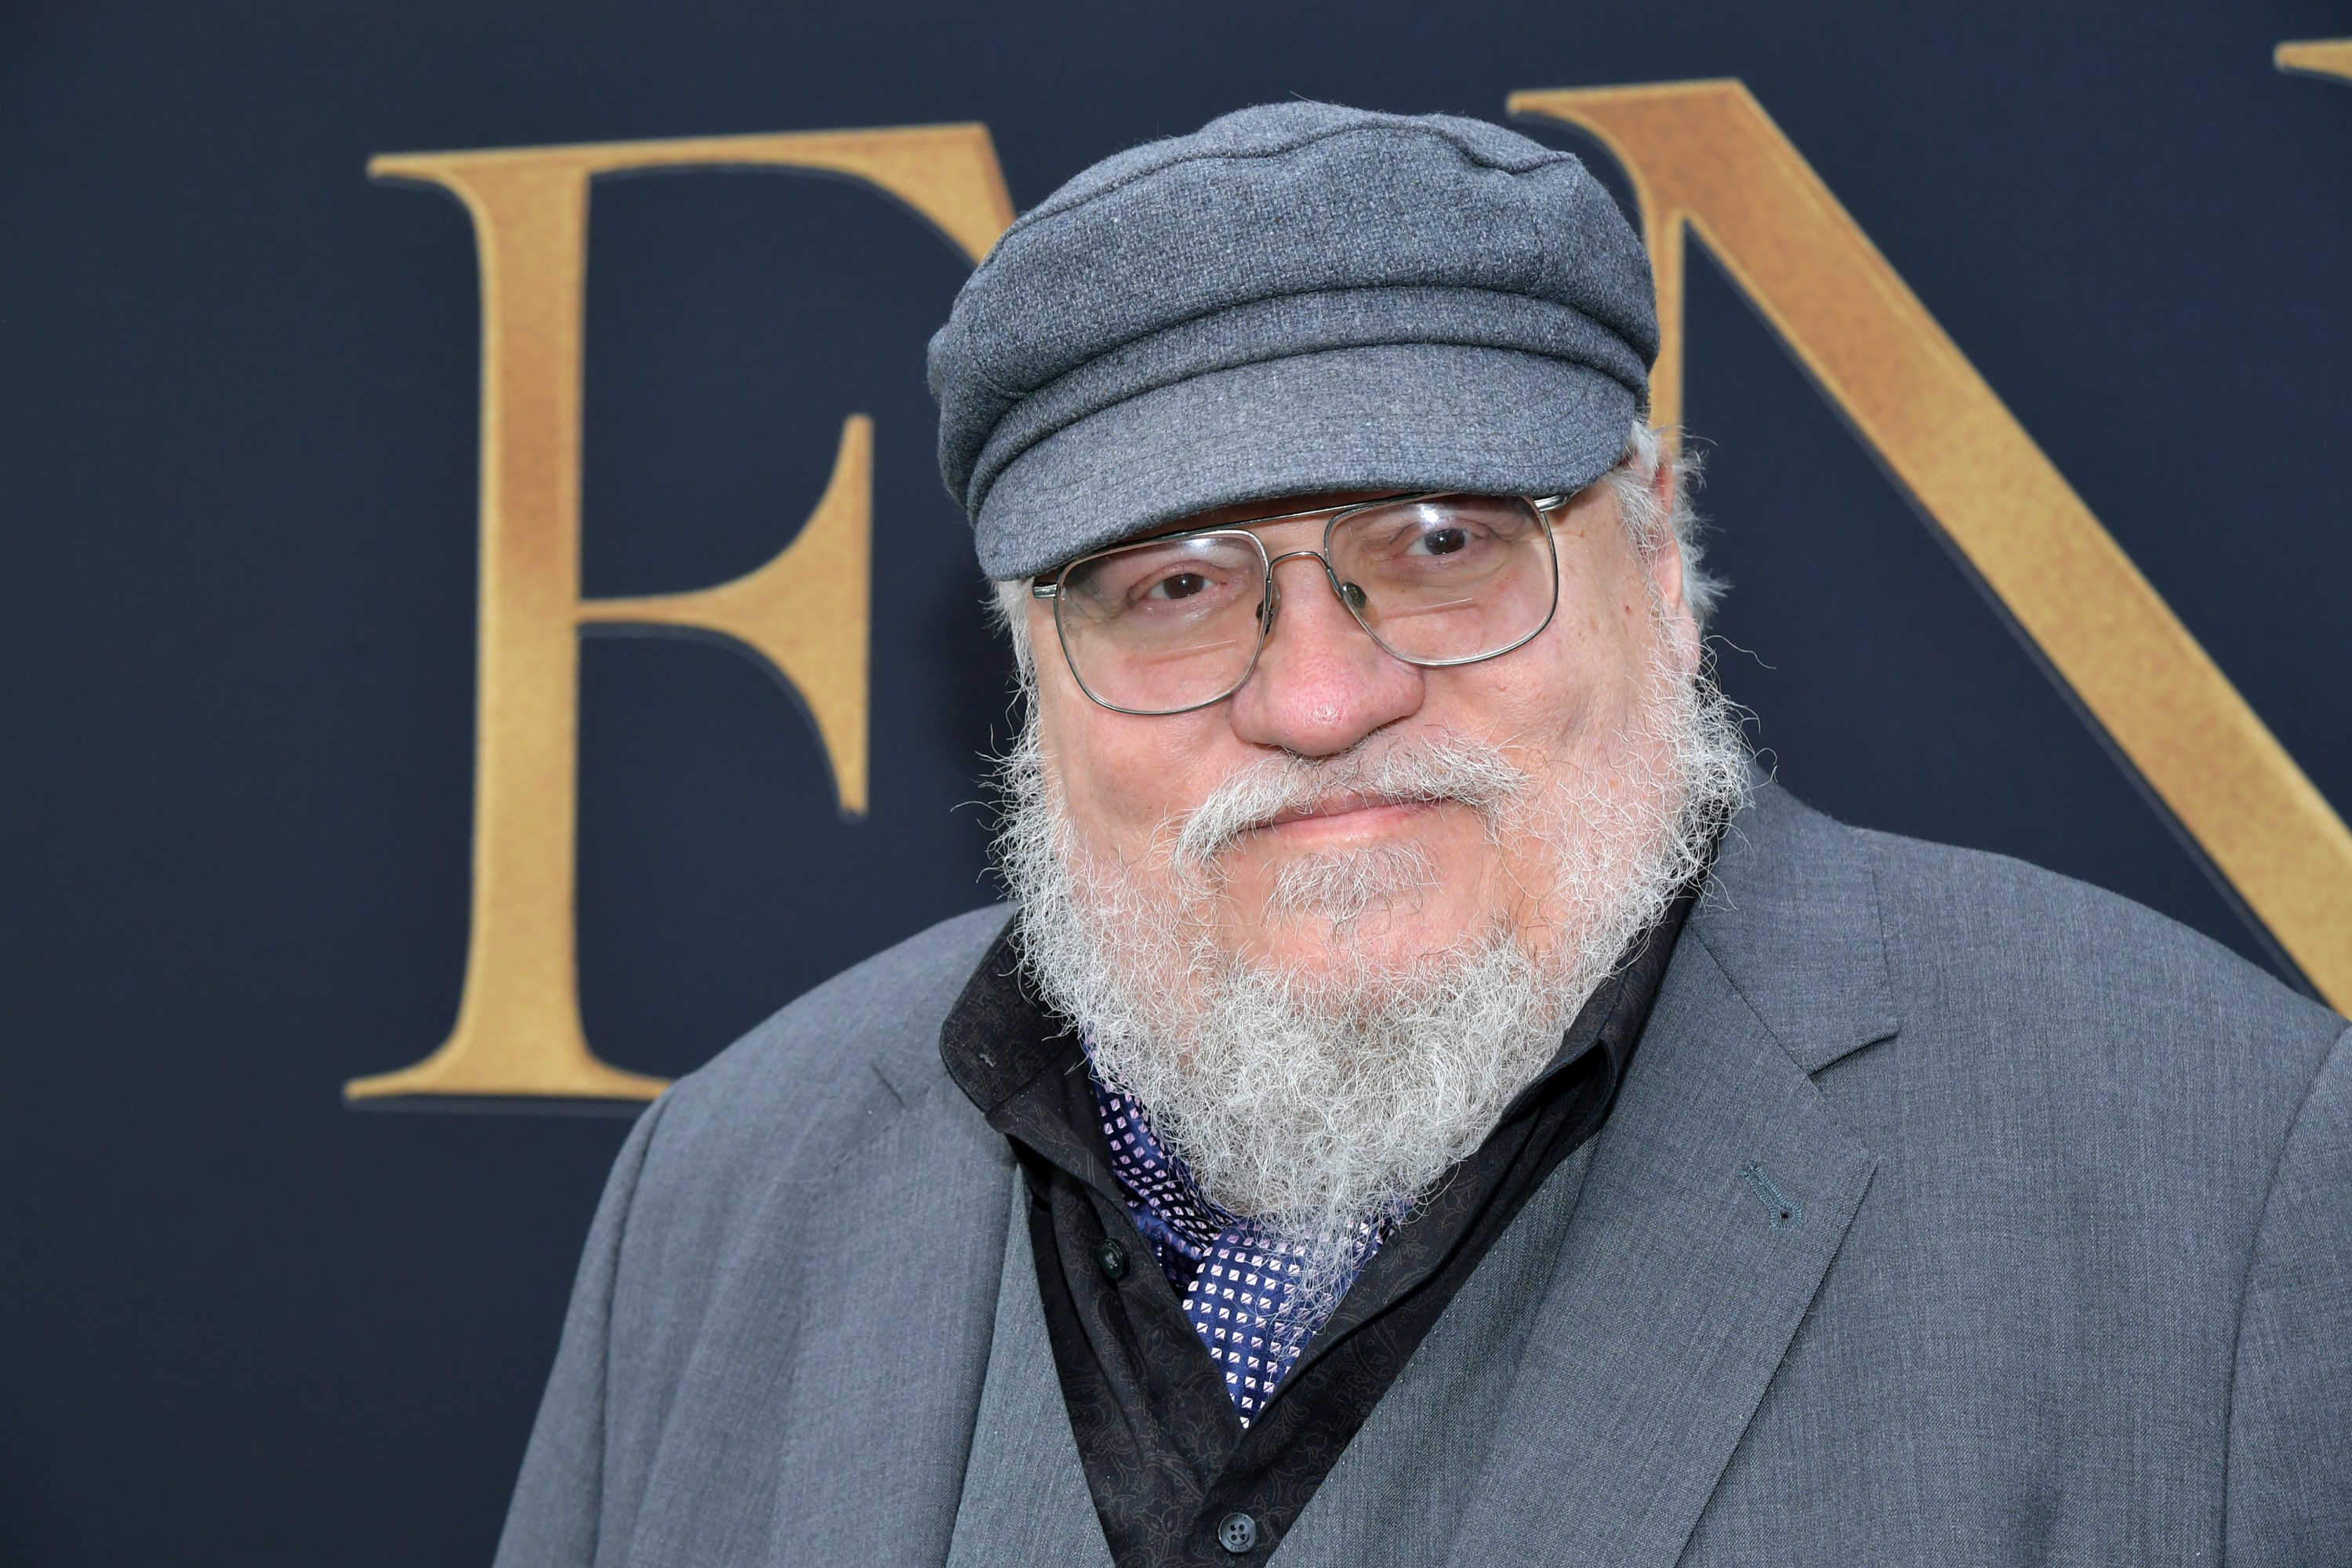 WESTWOOD, CALIFORNIA - MAY 08: George R. R. Martin attends the LA Special Screening of Fox Searchlight Pictures' "Tolkien" at Regency Village Theatre on May 08, 2019 in Westwood, California. (Photo by Amy Sussman/Getty Images)